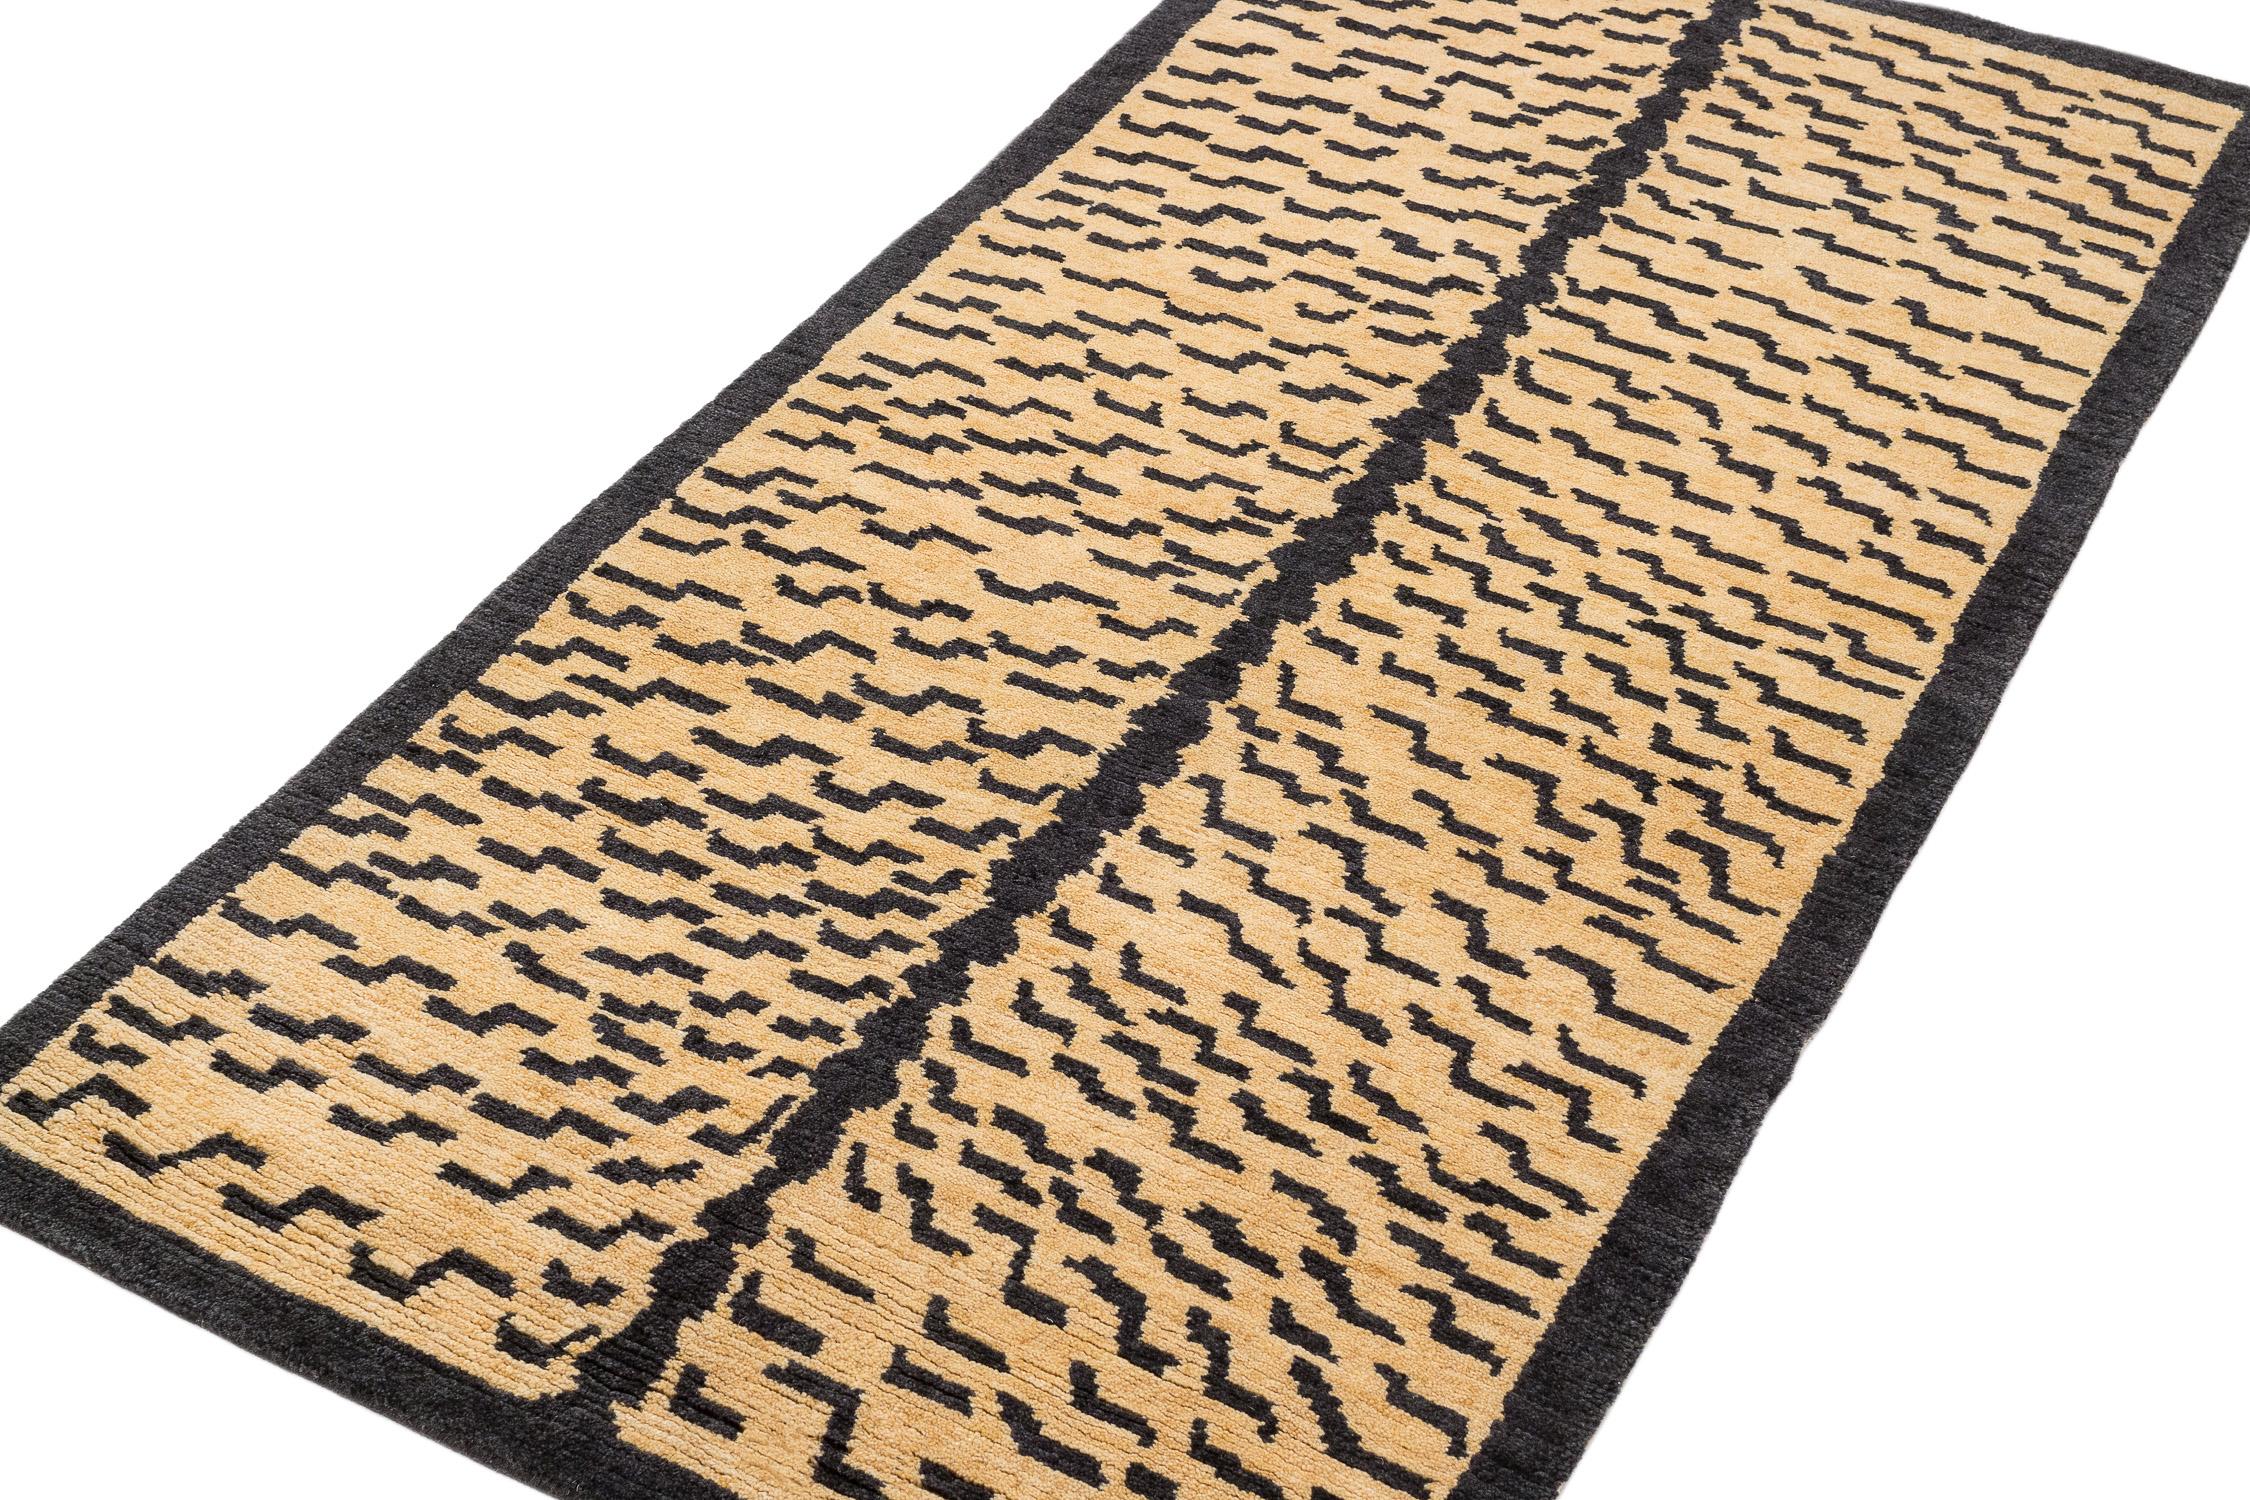 This tiger carpet is a fresh take on an original Joseph Carini design. It has a textured weave - a Devi weave, 60 knot. It is 100% wool, hand-spun, and handwoven in Nepal. The abstract animal print is bold but not overwhelmingly so. Measures: 3' x